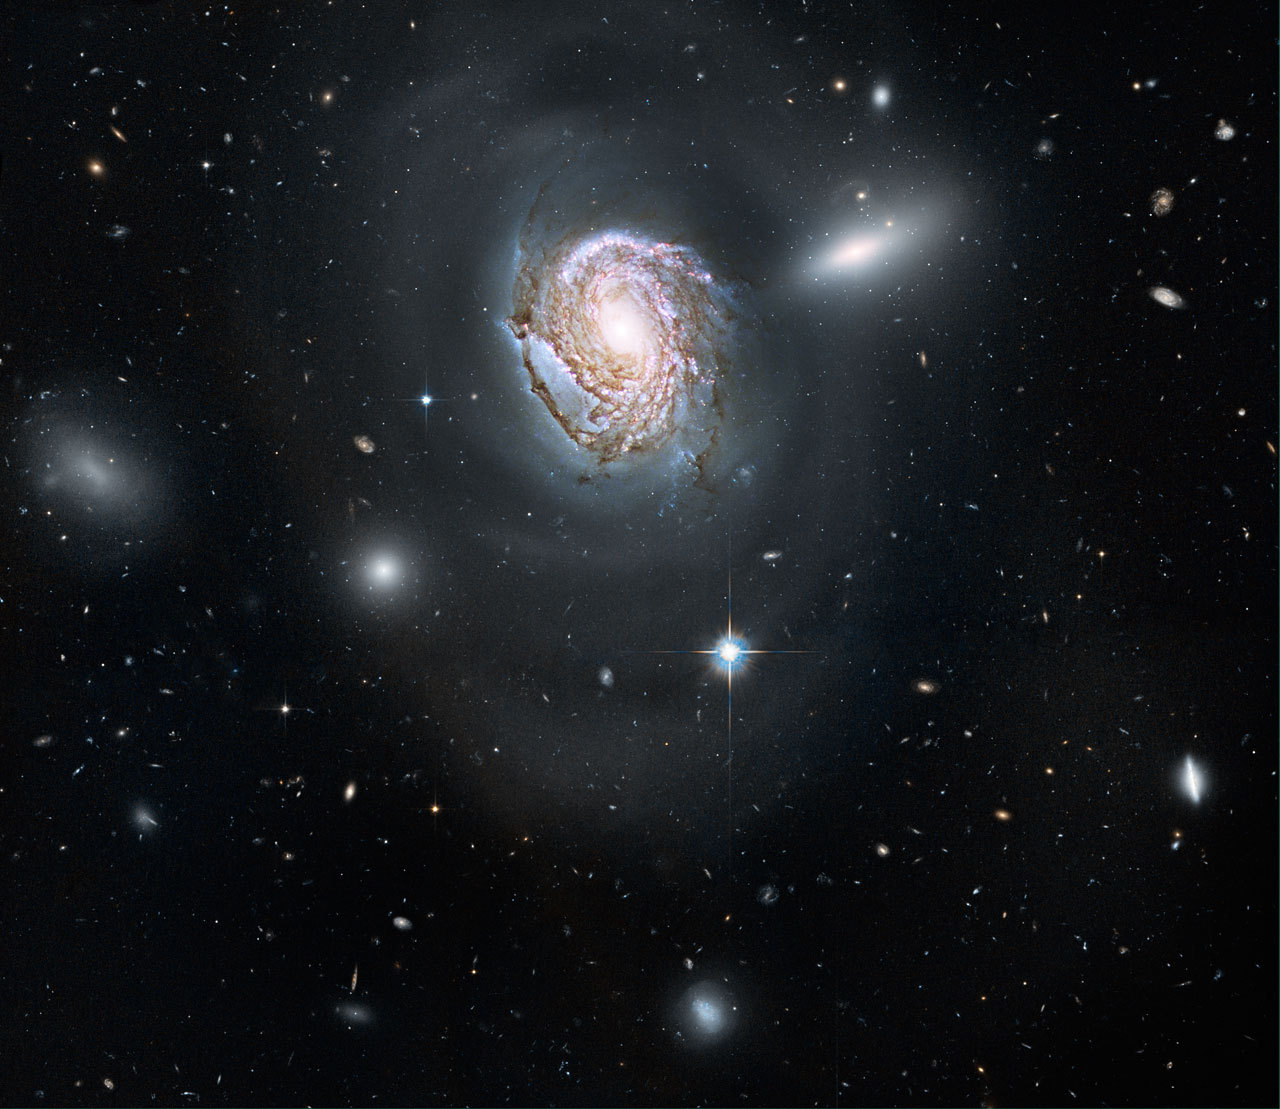 brightestofcentaurus:
“ NGC 4911
NGC 4911 is a spiral galaxy located about 320 million light years away int he Coma Cluster of galaxies, towards the constellation Coma Berenices. The Coma Cluster contains nearly 1,000 galaxies, one of the densest...